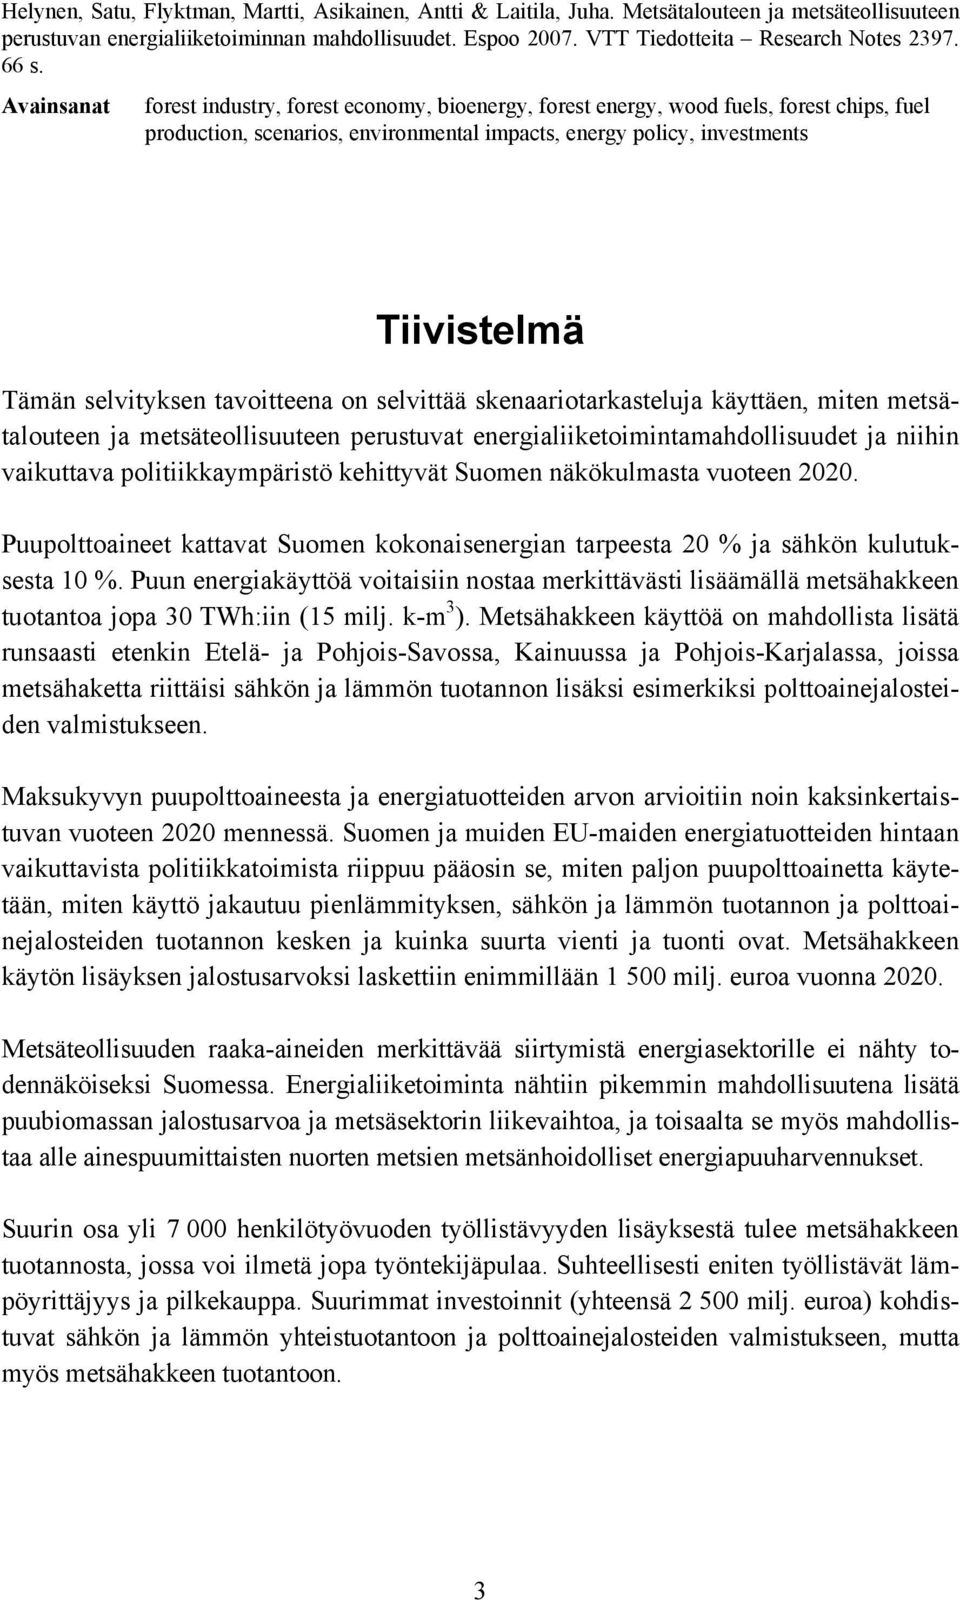 Avainsanat forest industry, forest economy, bioenergy, forest energy, wood fuels, forest chips, fuel production, scenarios, environmental impacts, energy policy, investments Tiivistelmä Tämän